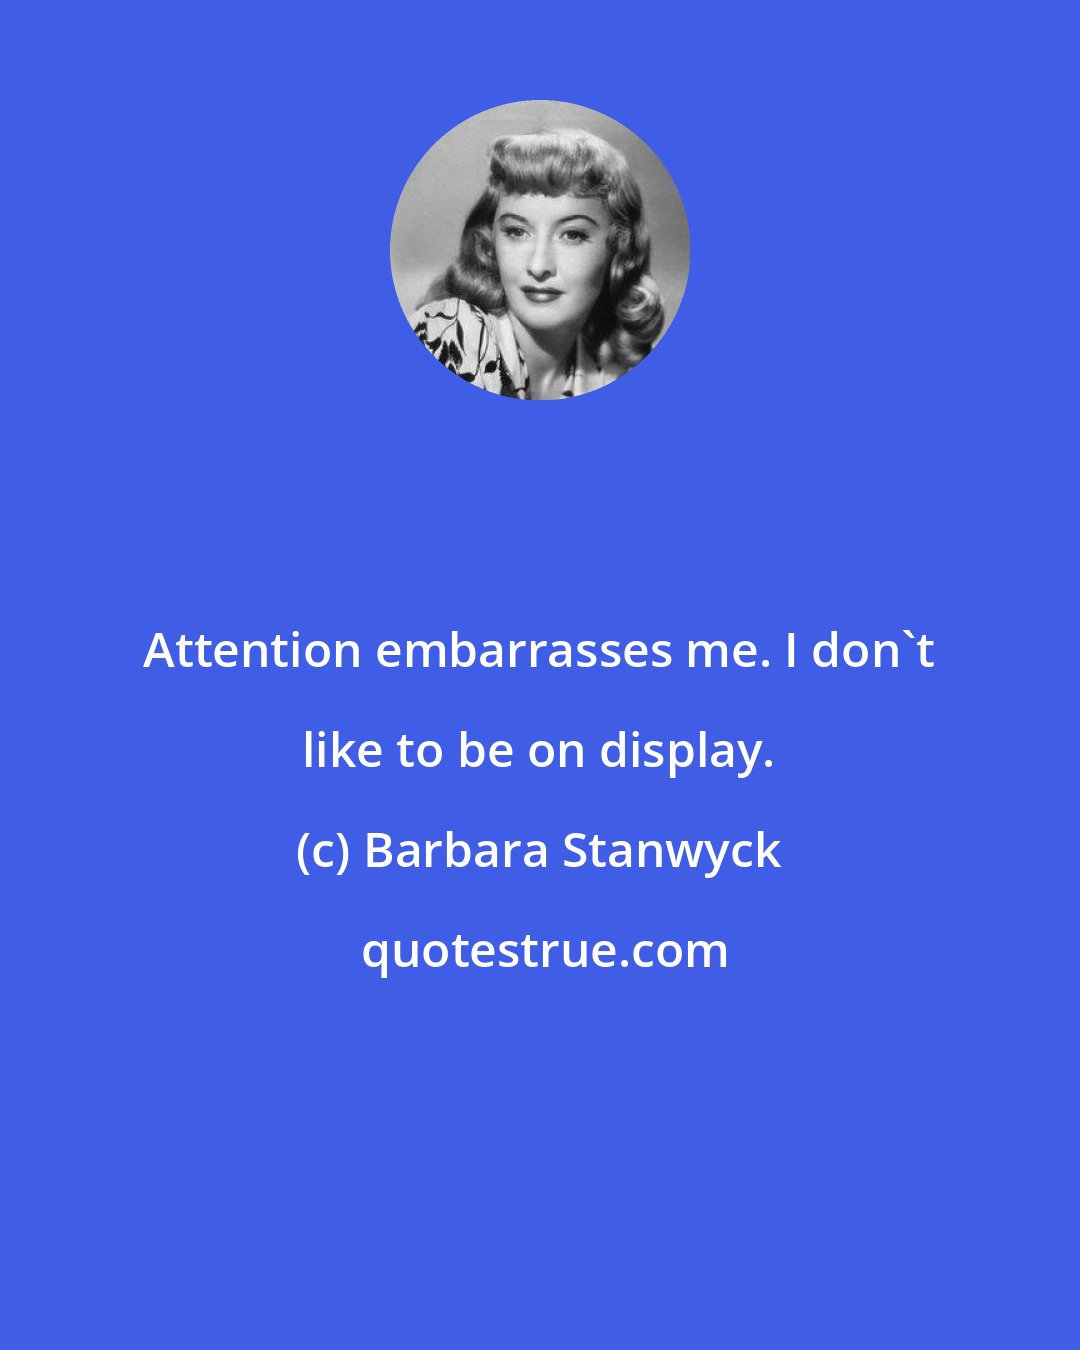 Barbara Stanwyck: Attention embarrasses me. I don't like to be on display.